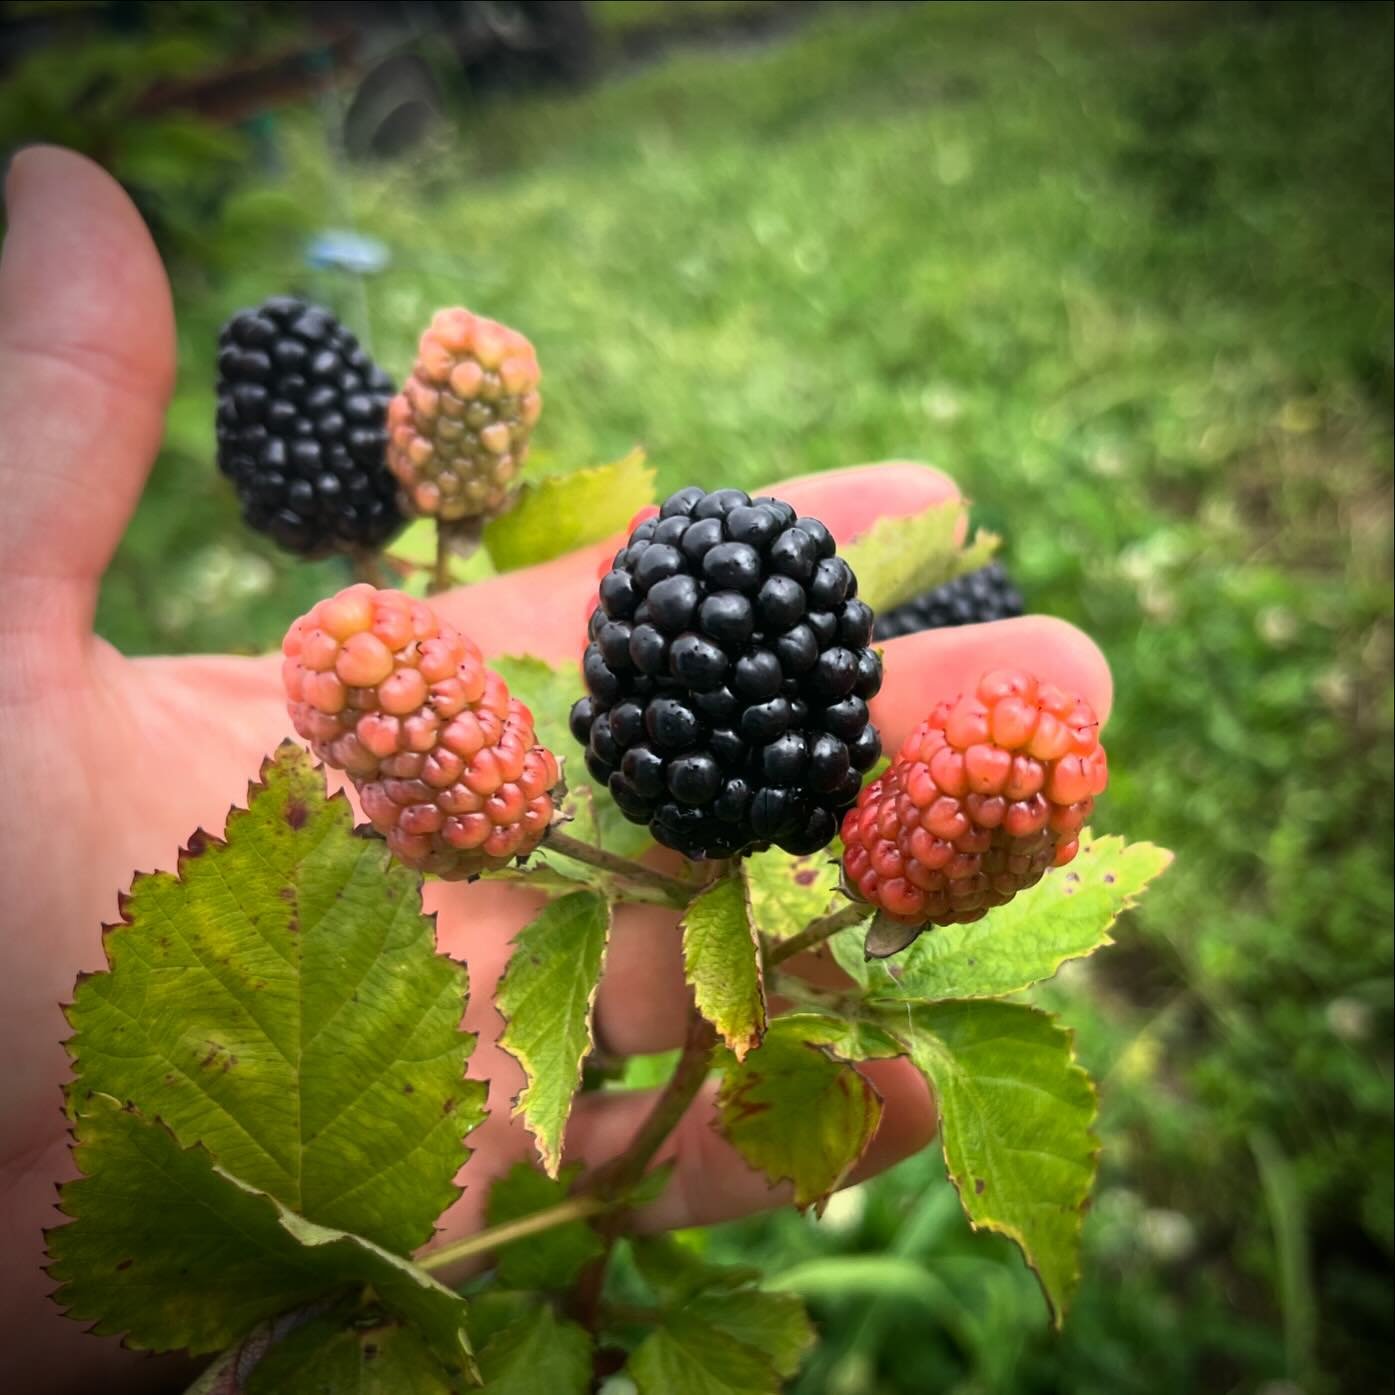 Still a few spots open for blackberry picking tomorrow! They are coming on fast - it&rsquo;ll be easy to fill a bucket with fat juicy berries. After that we&rsquo;re picking Thursday - those spots are open now too on the website! www.purelandorganic.